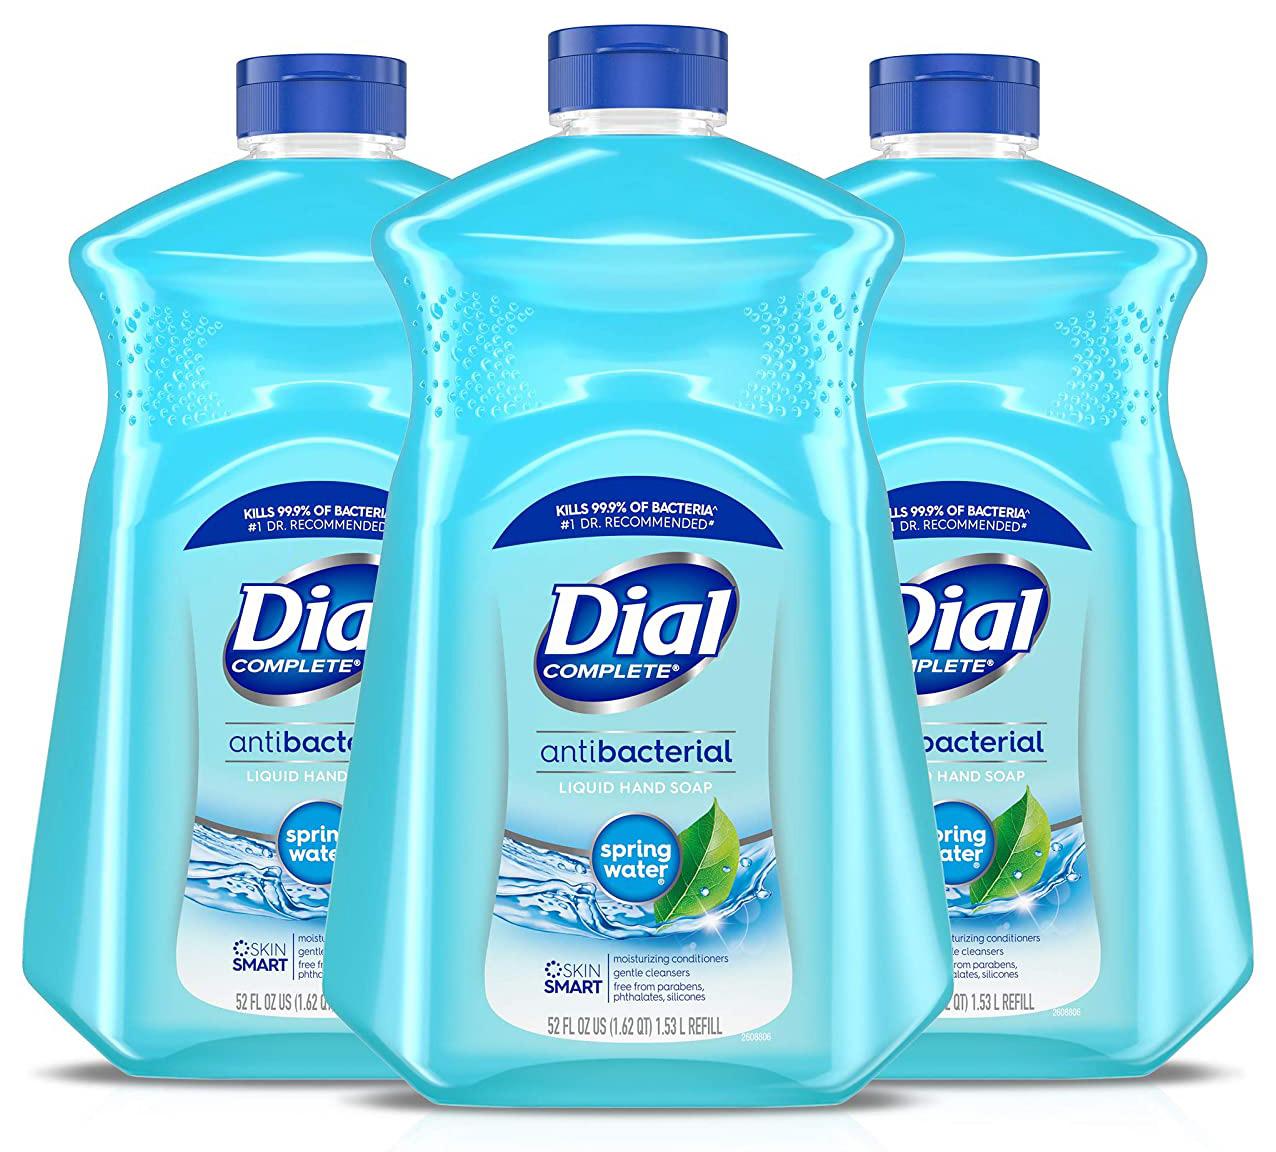 6 Dial Antibacterial Liquid Hand Soap Refill for $16.18 Shipped